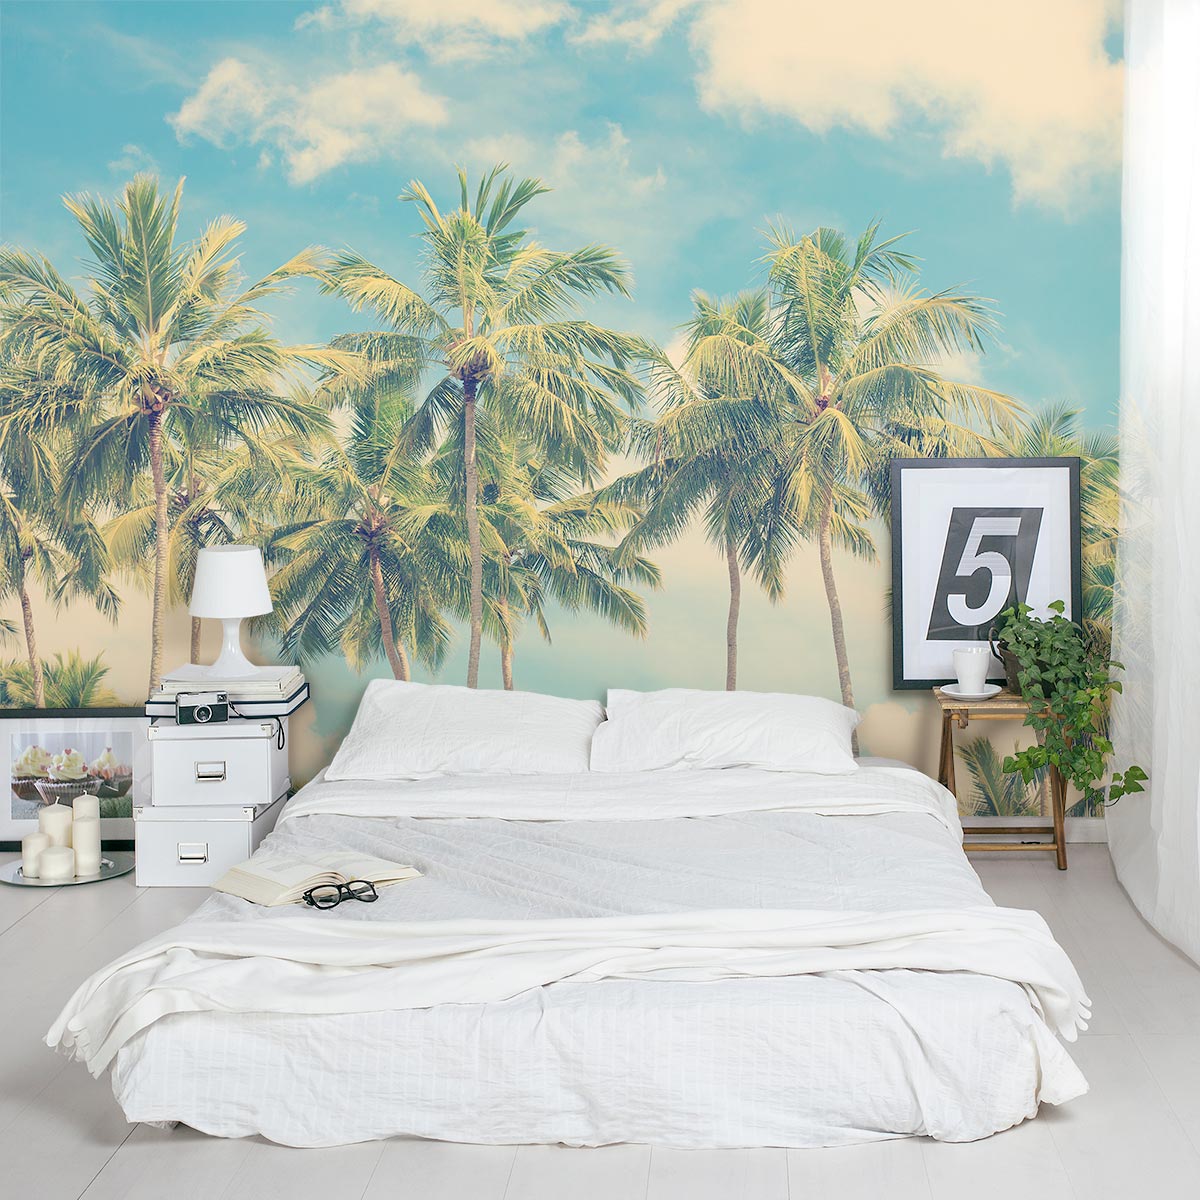 Vintage Palm Tree Wall Mural  Vintage Palm Wall Decal